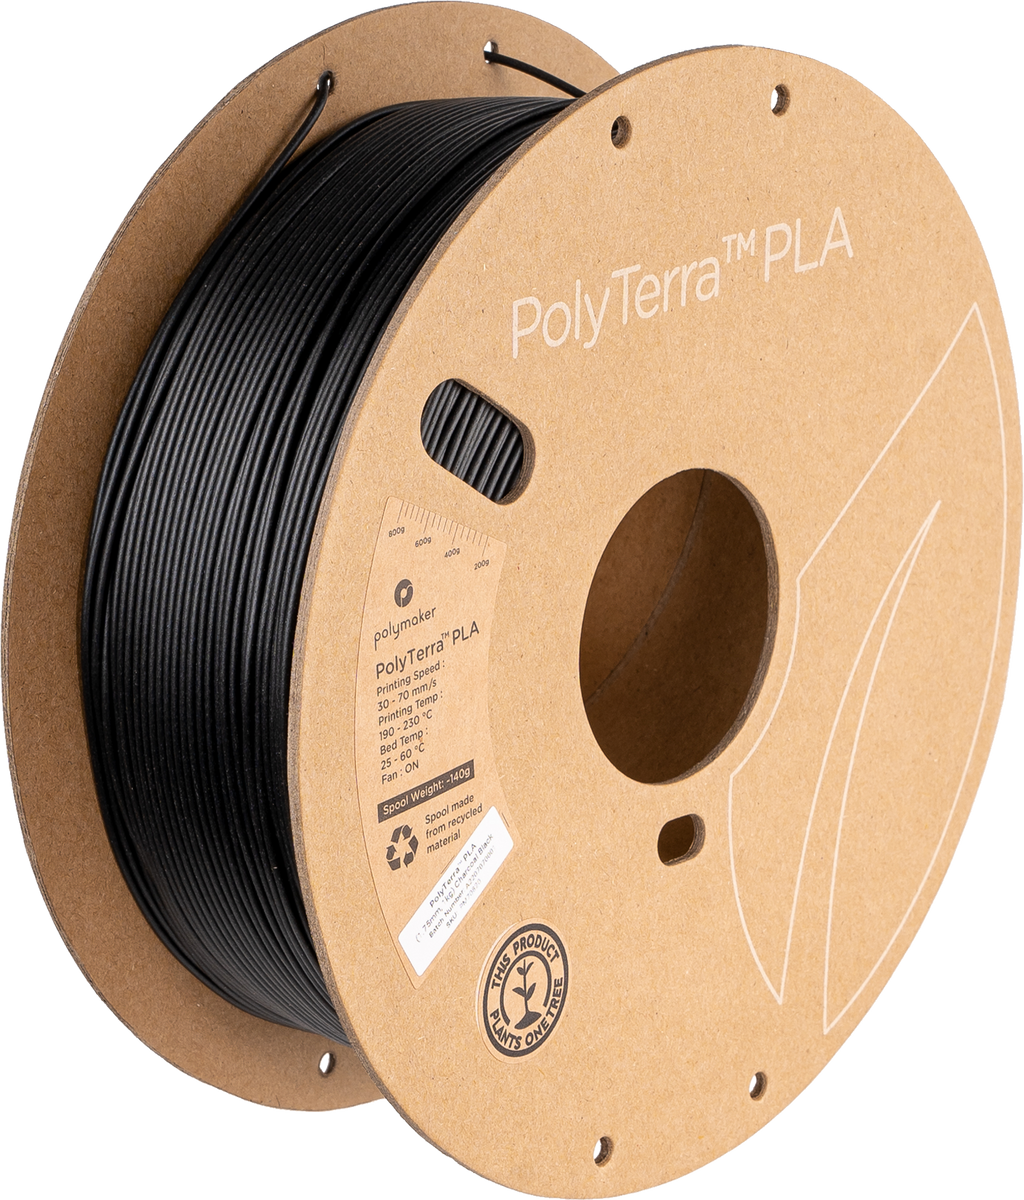 Discussing PolyMaker PolyTerra PLA Filament: Why it is so good? #Polymaker # PolyTerra 